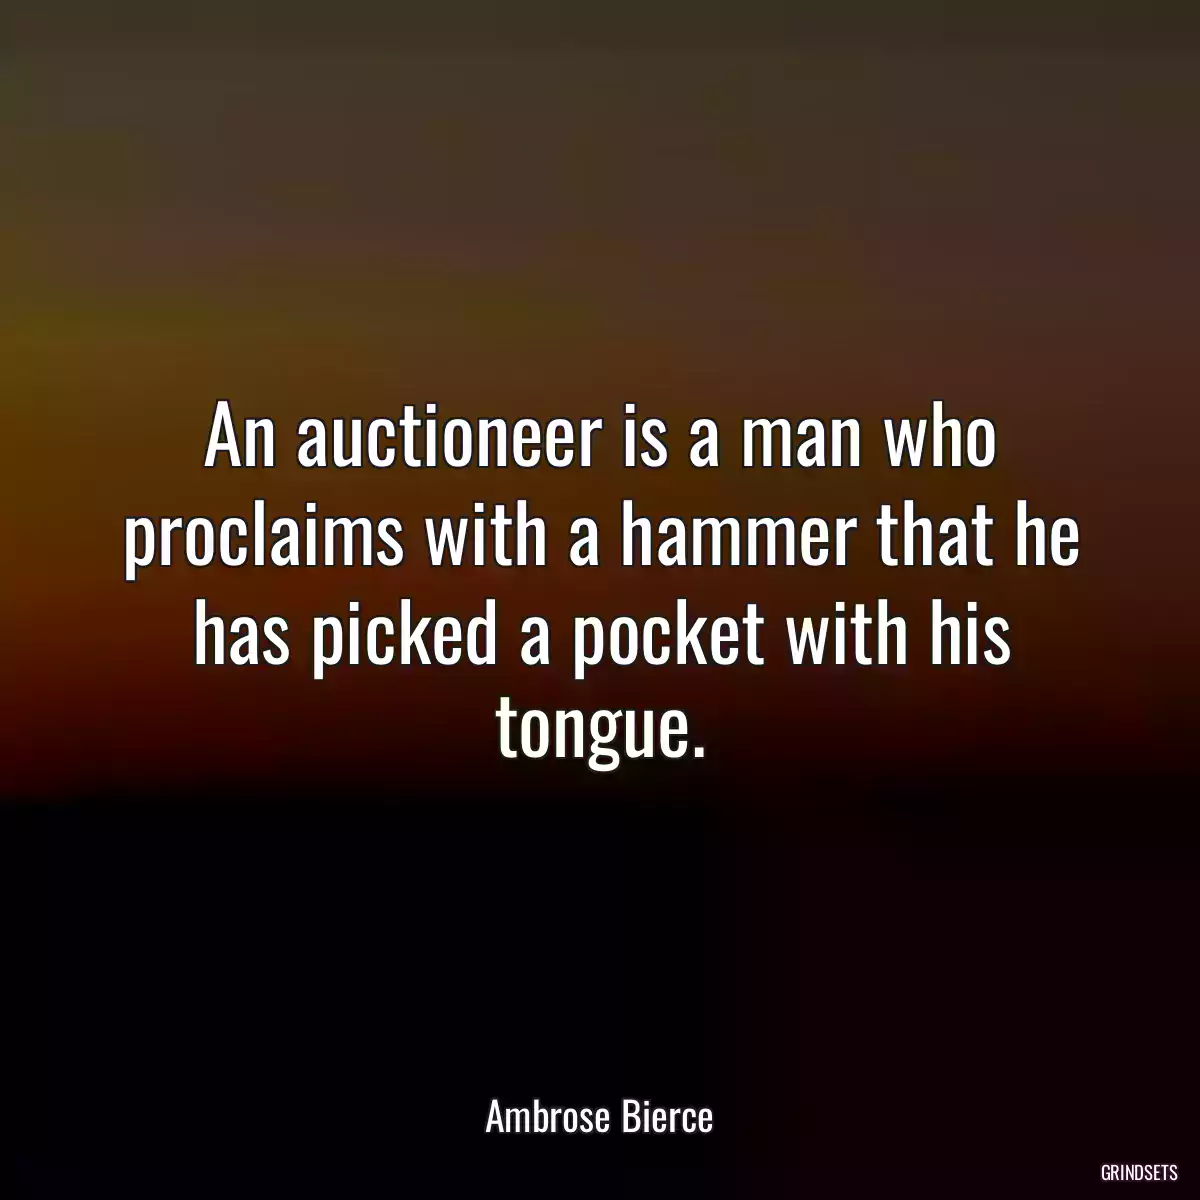 An auctioneer is a man who proclaims with a hammer that he has picked a pocket with his tongue.